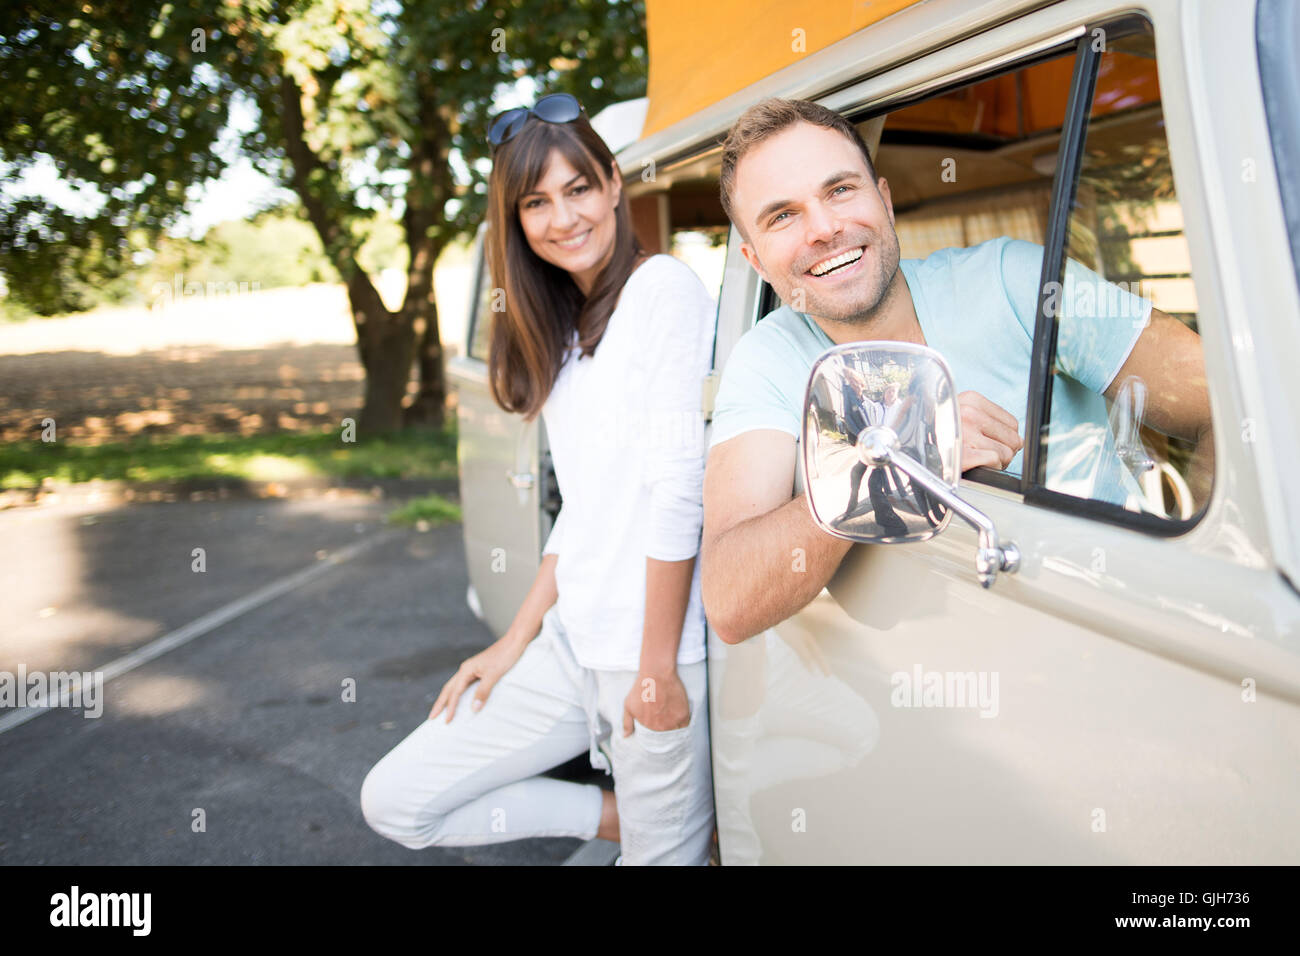 Duesseldorf, Germany. 17th Aug, 2016. Models Dunja and Stefan posing in front of a Volkswagen T2a Westfalia during a press conference prior to the Camping Fair 'Caravan Salon' in Duesseldorf, Germany, 17 August 2016. According to the organisor, it's the world's largest fair for motor homes and caravans. This year its runs from 27 August to 4 September and this year celebrates its 55th anniversary. Photo: MARUIS BECKER/dpa/Alamy Live News Stock Photo